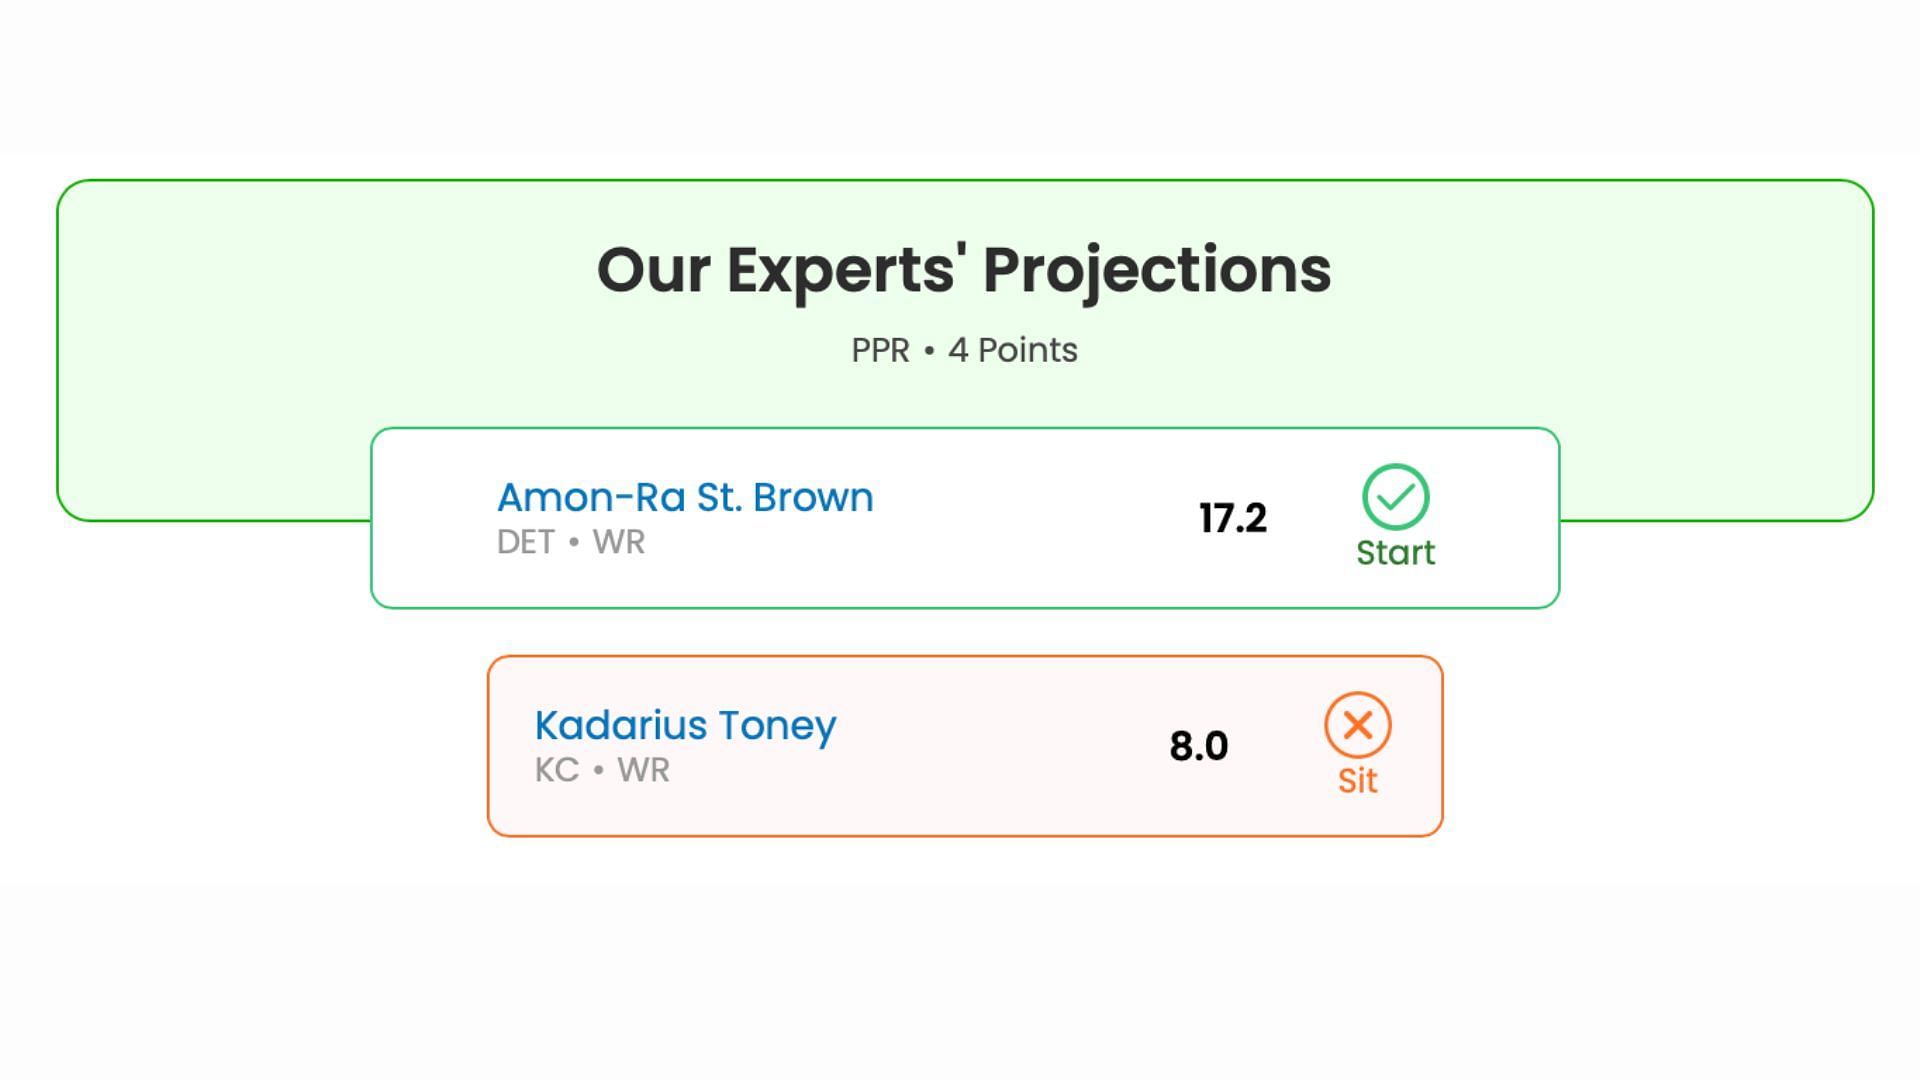 The projected points between the wideouts per Sportskeeda optimizer